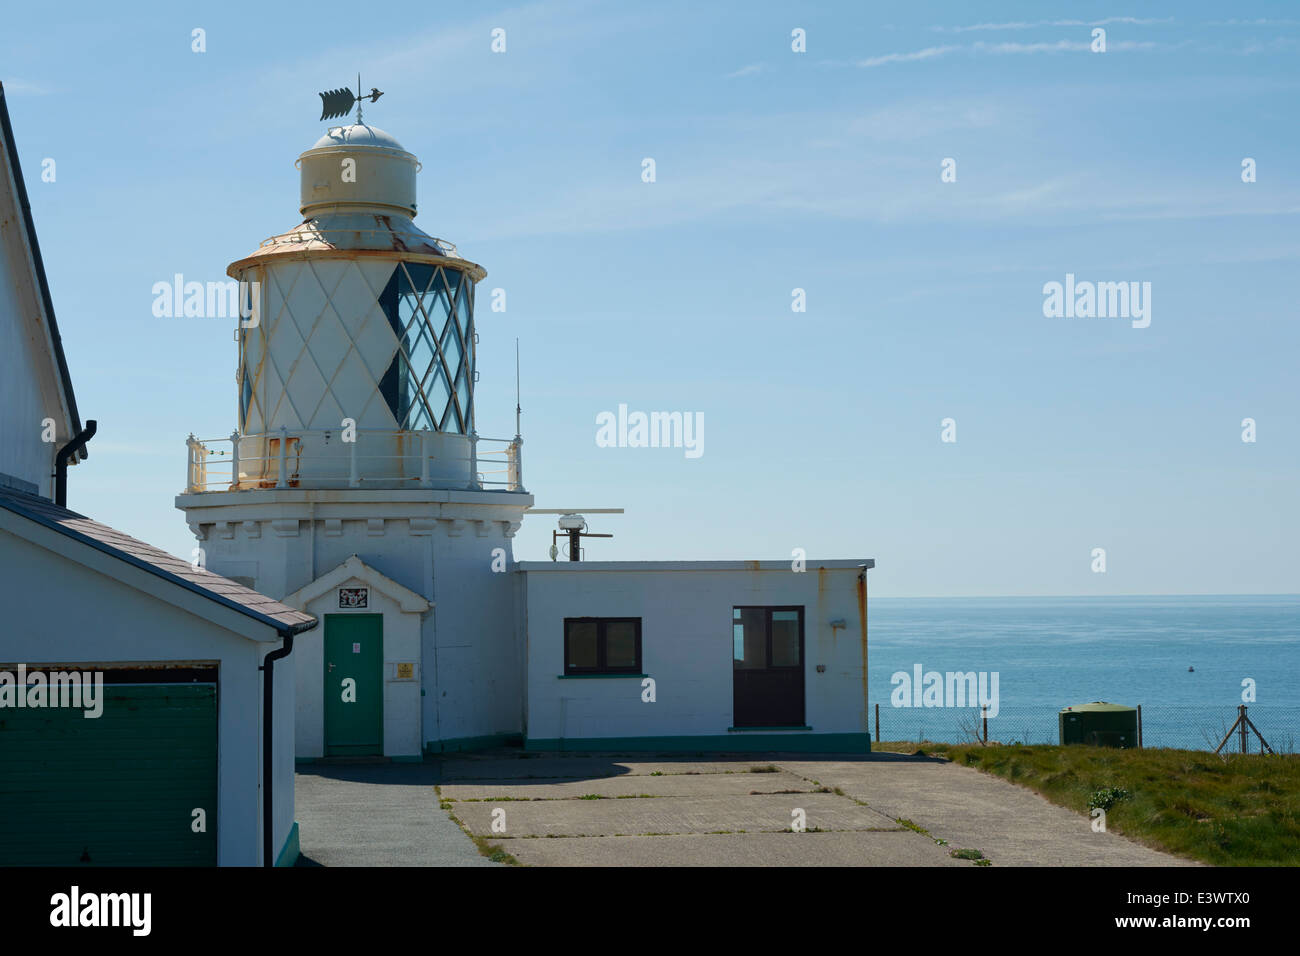 Lighthouse at St Ann's Head, Dale, Pembrokeshire, Wales, UK Stock Photo